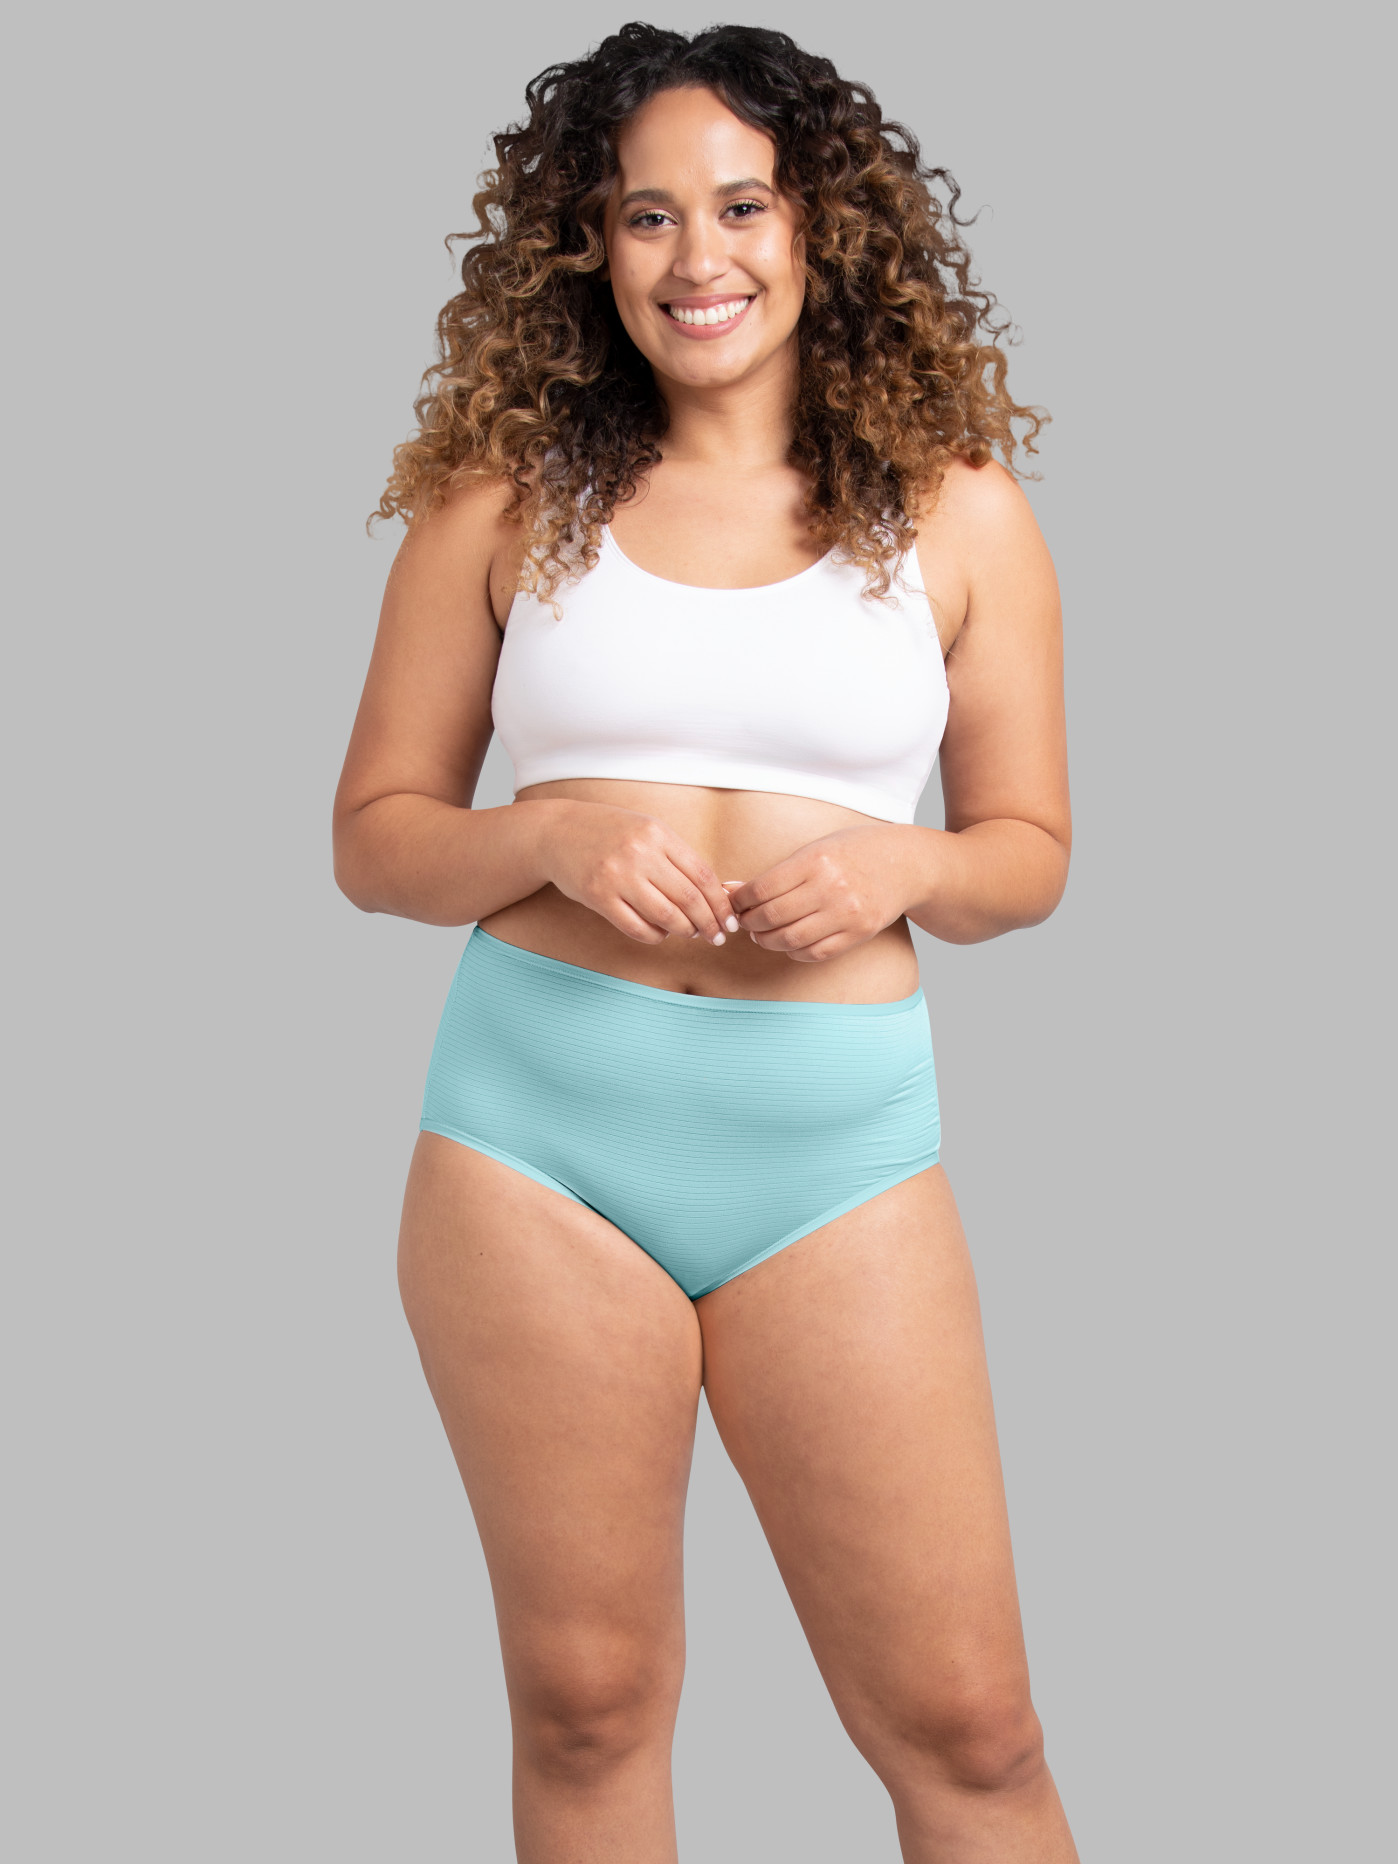  Fruit Of The Loom Womens 360 Underwear, High Performance  Stretch For Effortless Comfort, Available, Cotton Blend-Plus Size Brief-6  Pack-Colors May Vary, 12 Plus